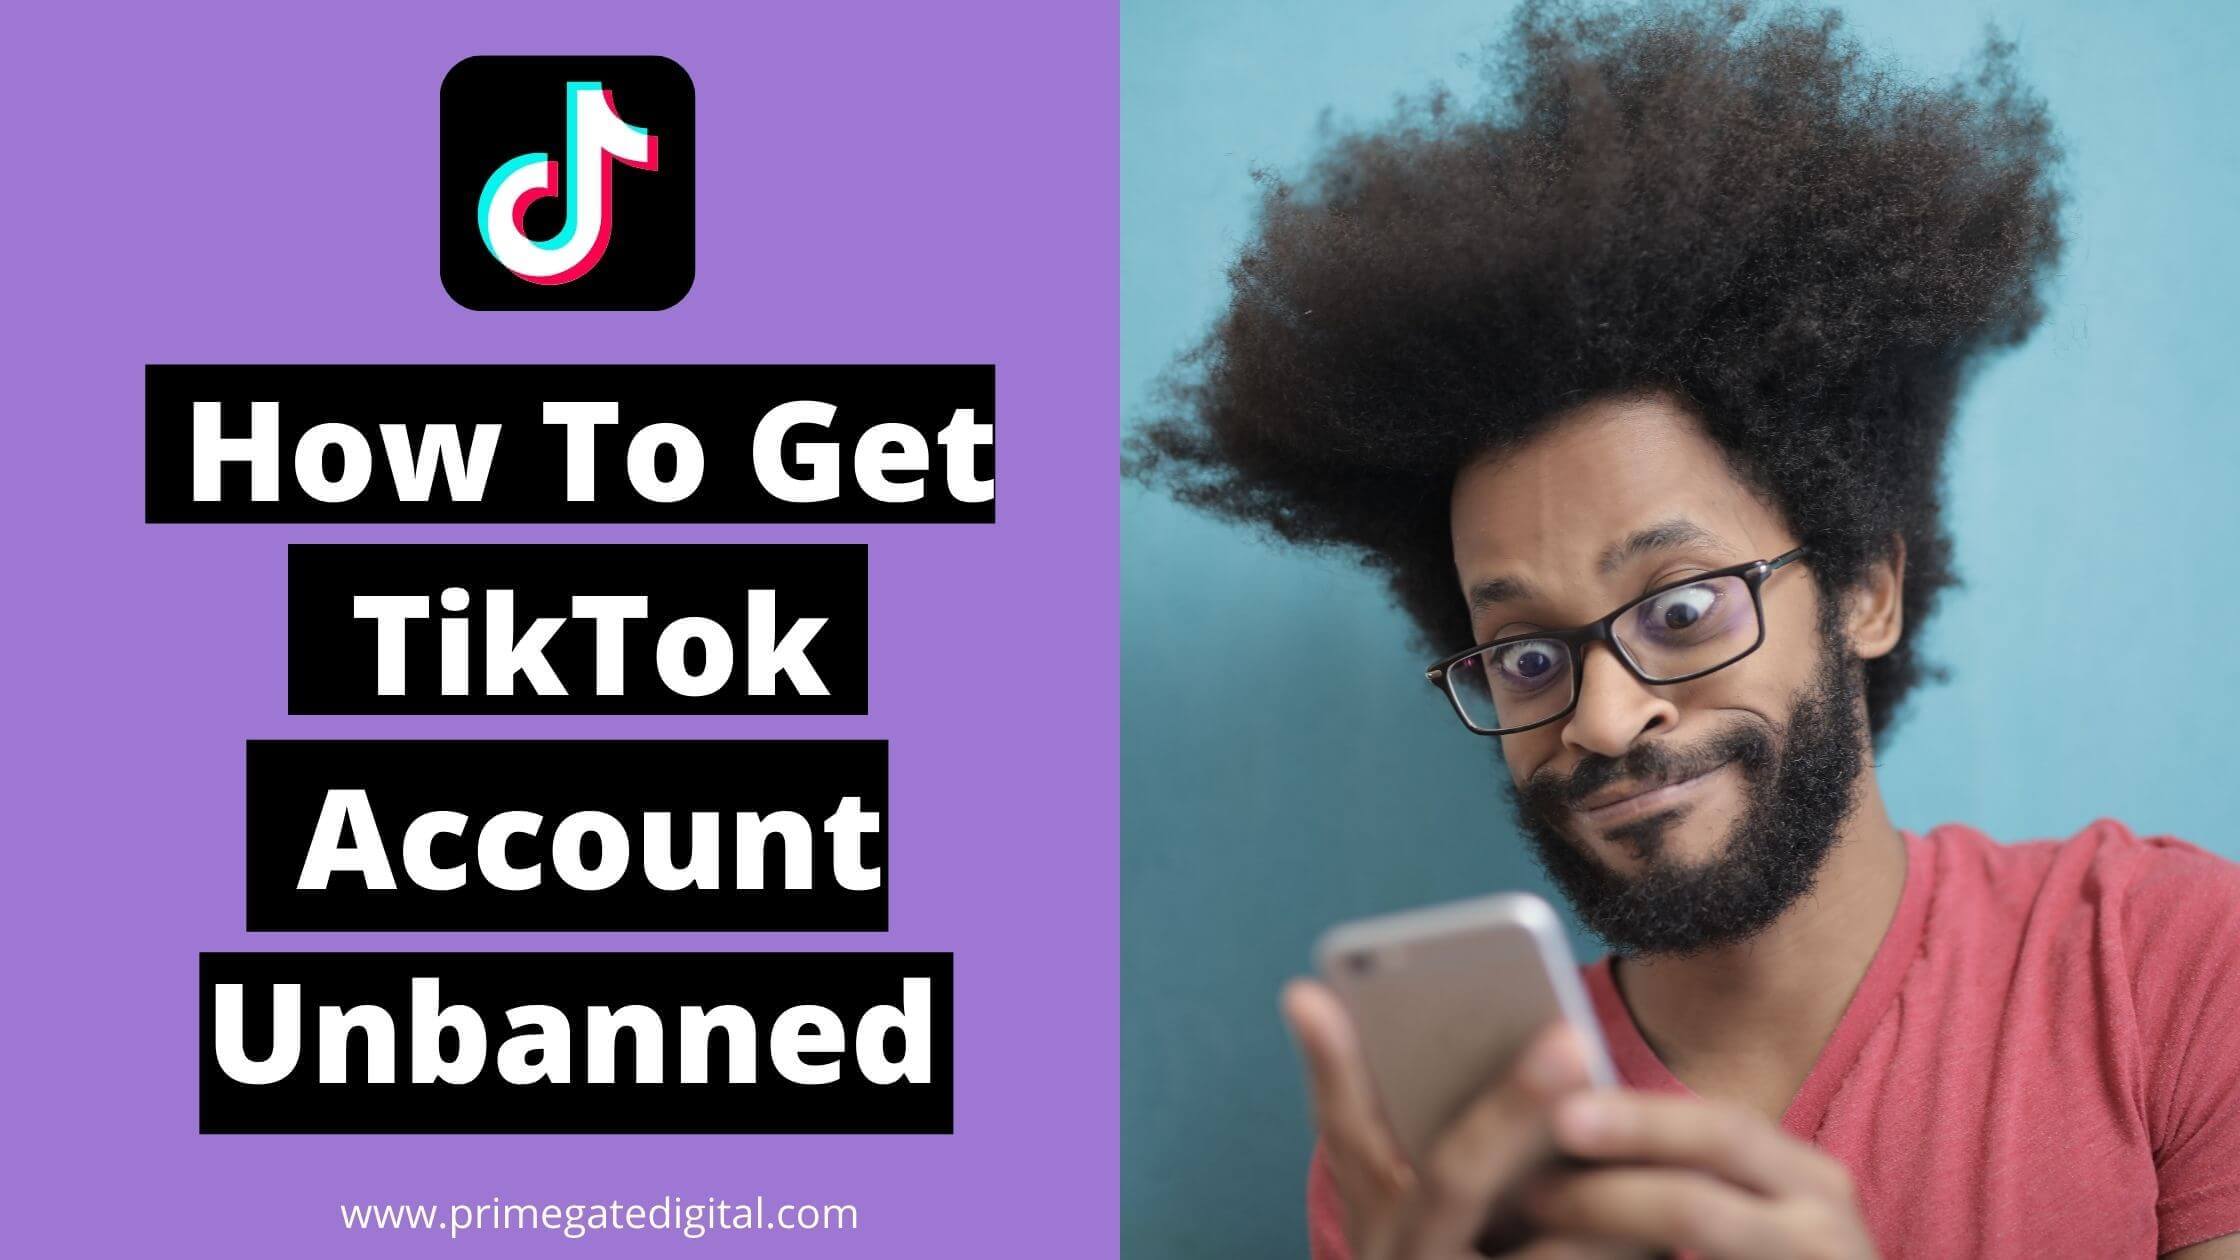 How to get tiktok account unbanned